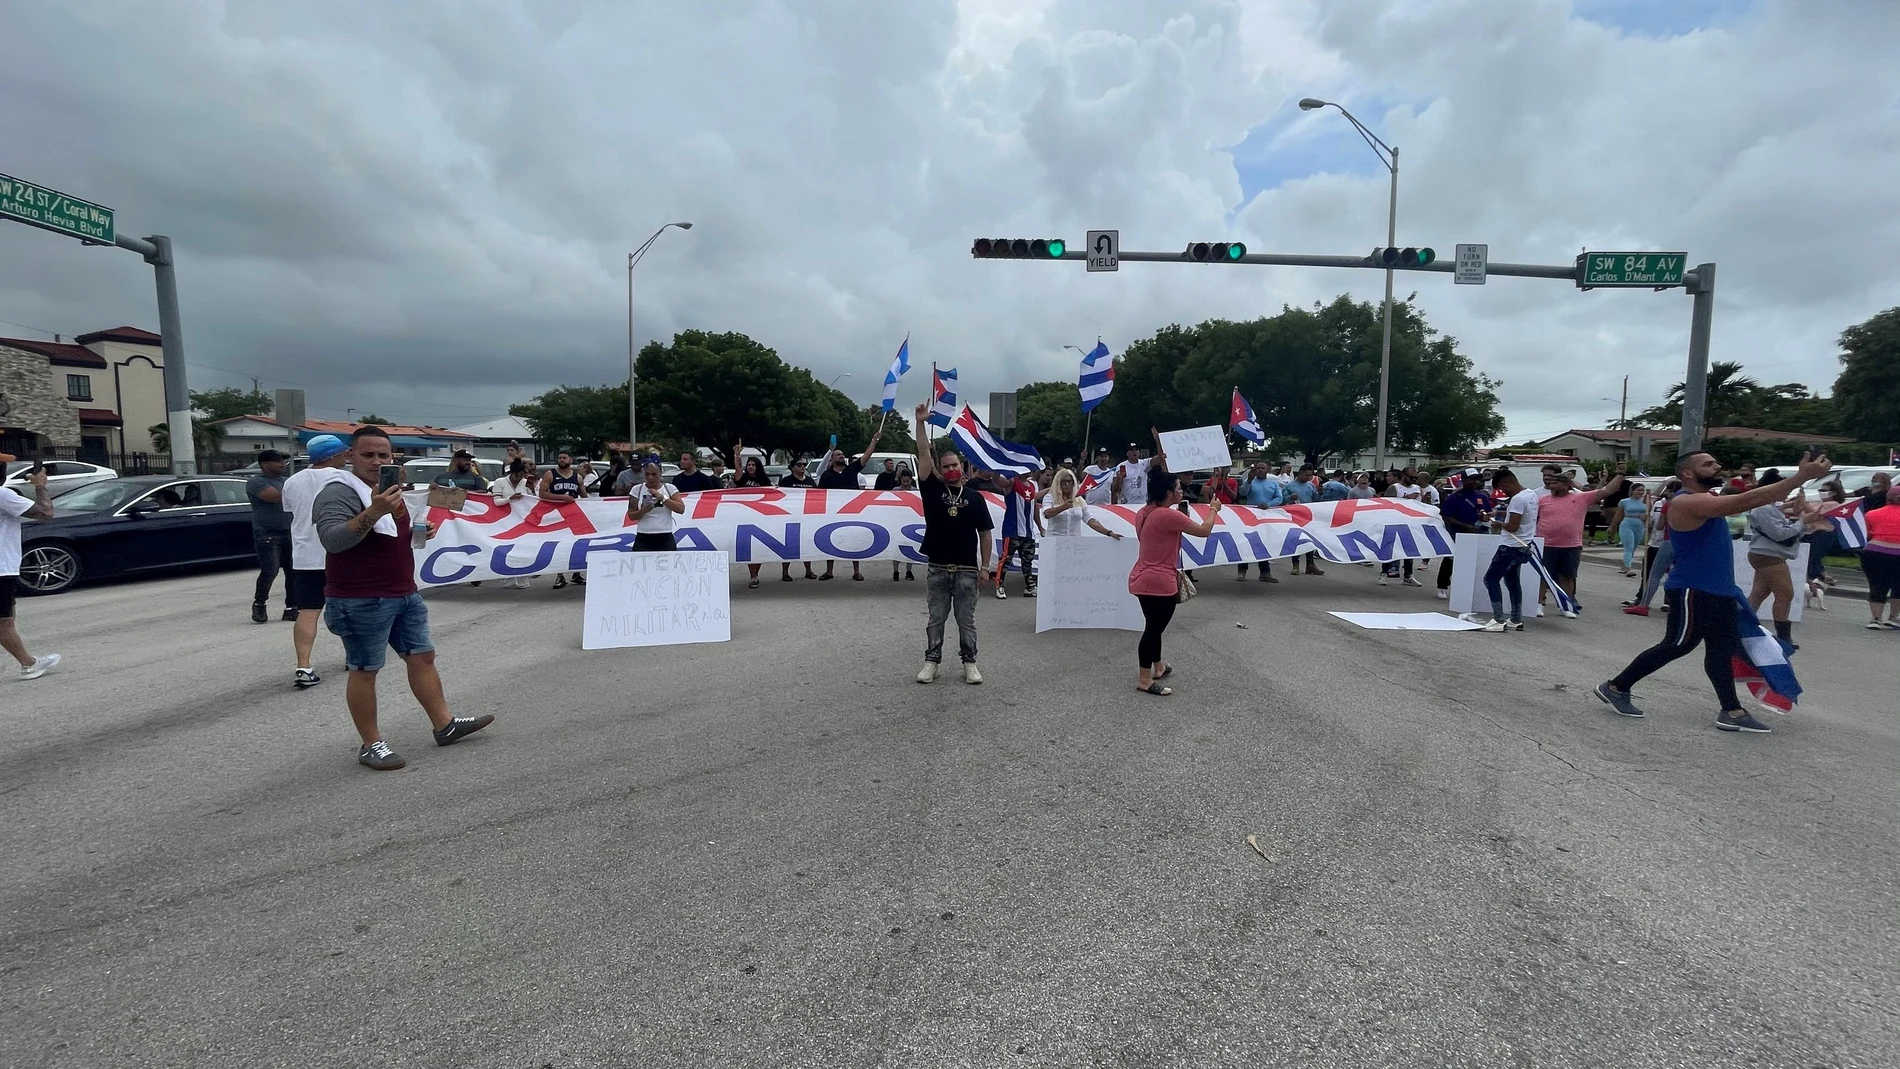 People hold flags, signs and a banner on the Palmetto Expressway following reports of protests in Cuba against its deteriorating economy, in Miami, Florida, July 13, 2021, in this image obtained via social media. INSTAGRAM @STANDFORCUBA via REUTERS ATTENTION EDITORS - THIS IMAGE HAS BEEN SUPPLIED BY A THIRD PARTY. MANDATORY CREDIT. NO RESALES. NO ARCHIVES.